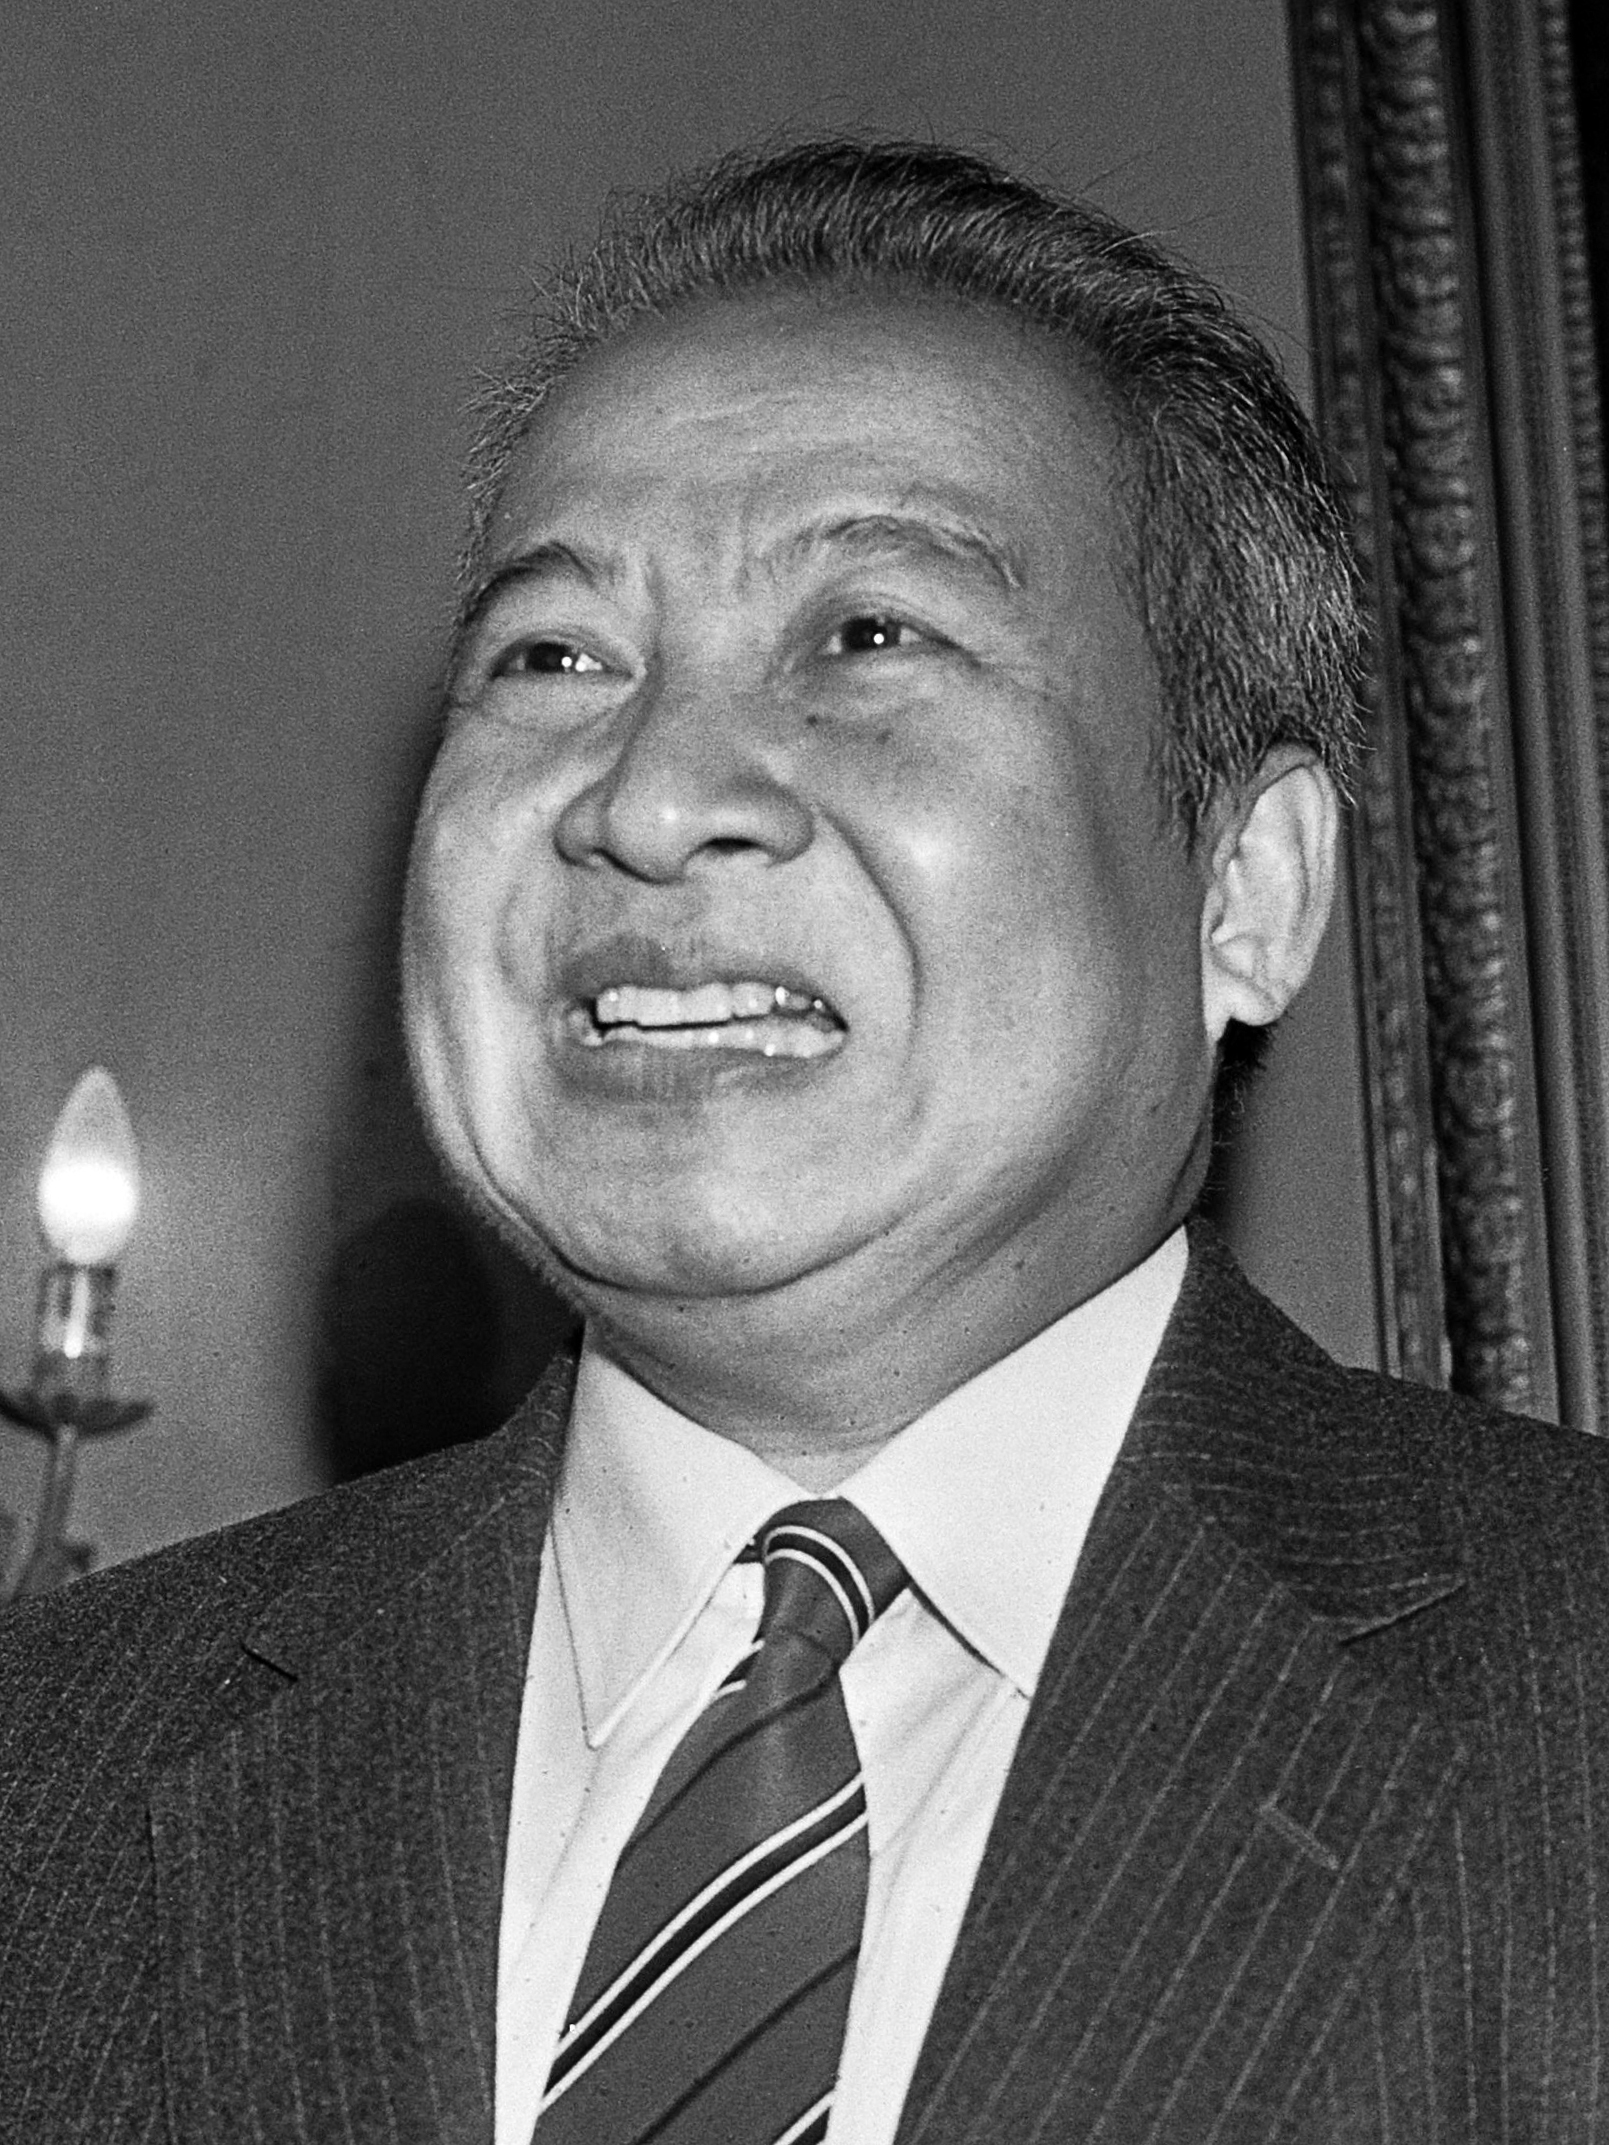 The Cambodian monarchy is restored, with Norodom Sihanouk as king.